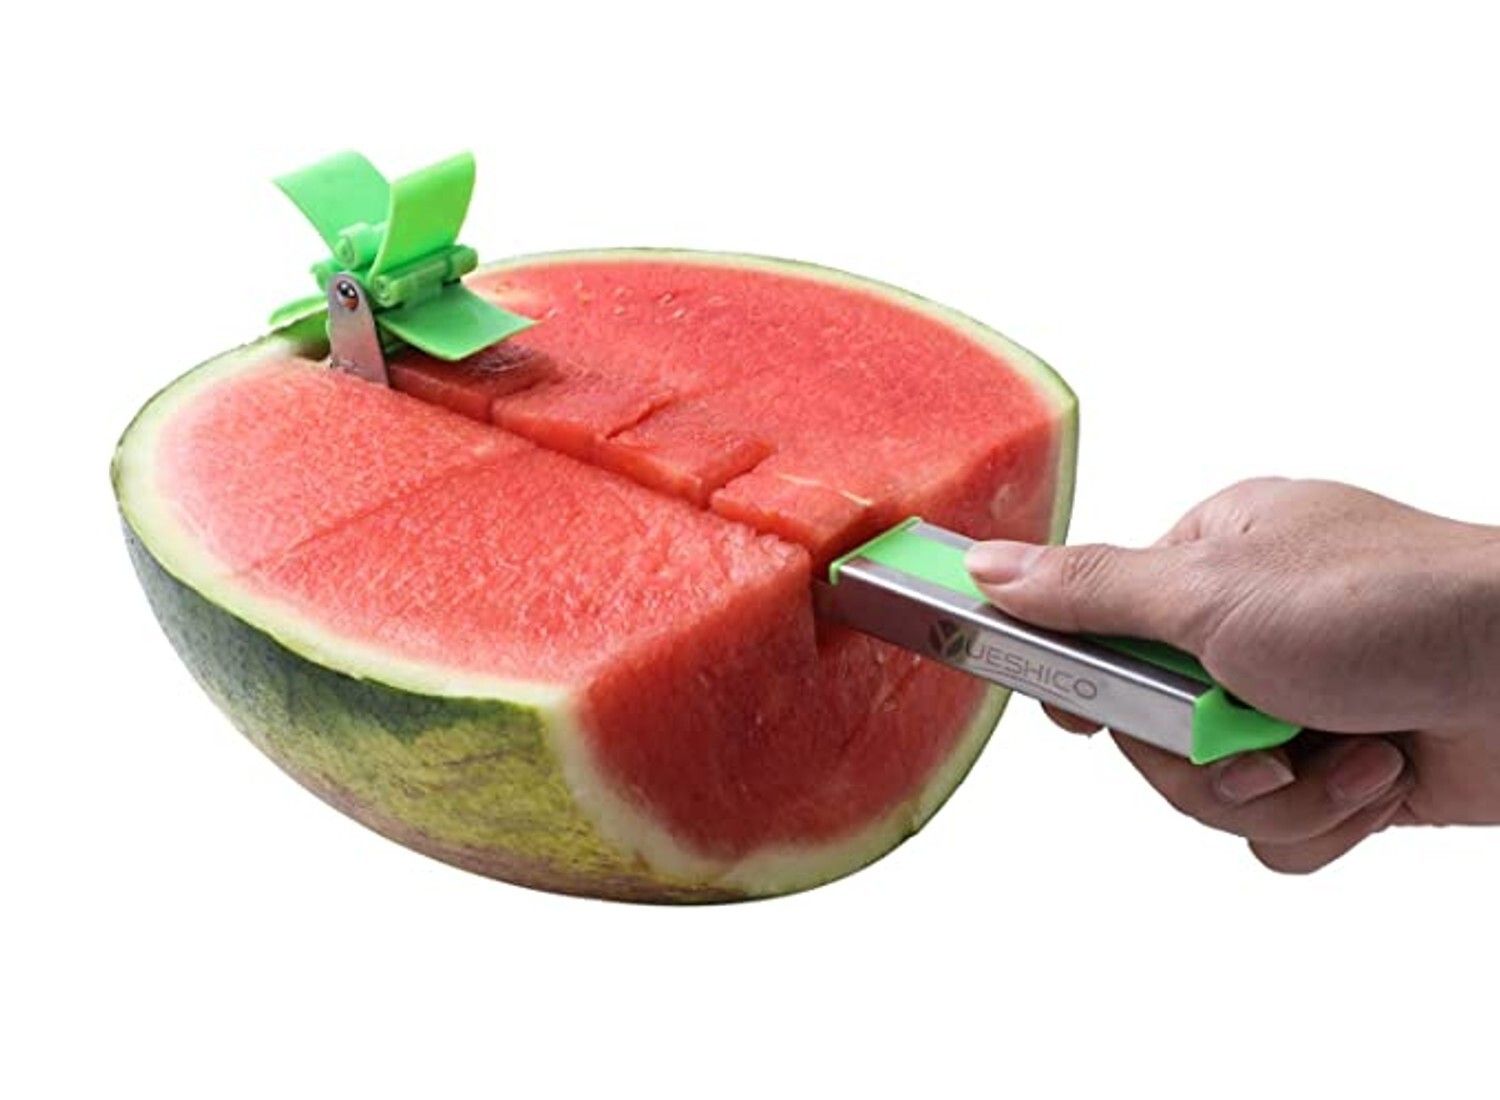 Watermelon Cutter Slicer Tool Stainless Steel Fruit Knife Molds For  Watermelon, Fruit Slicer Popsicle Mold, Cut Watermelon Chunks Quickly